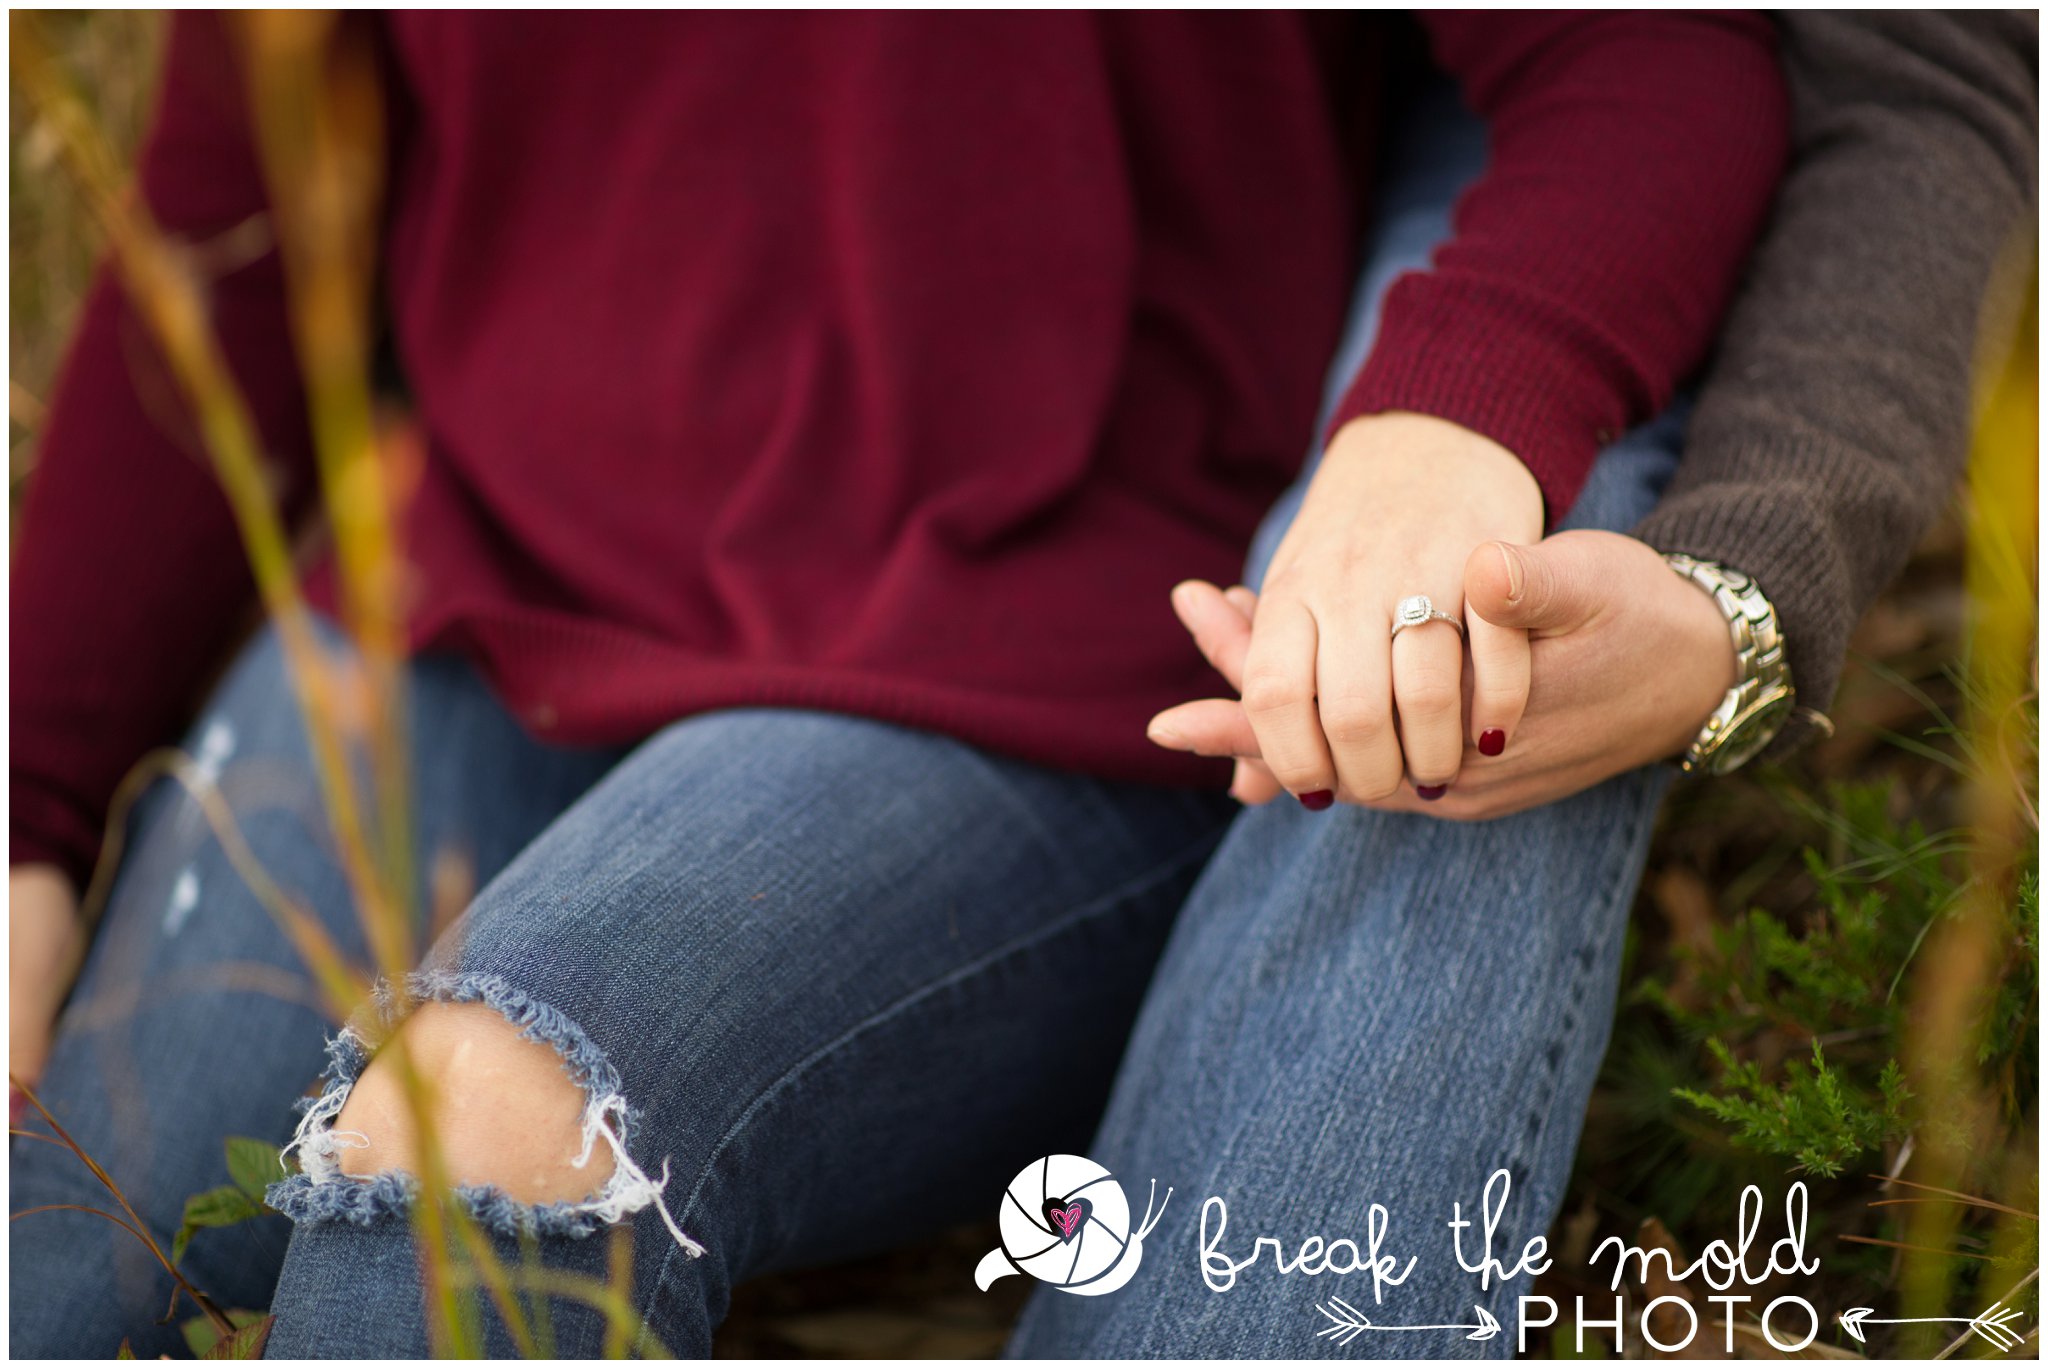 break-the-mold-photo-field-country-engagement-winter-shoot_6635.jpg